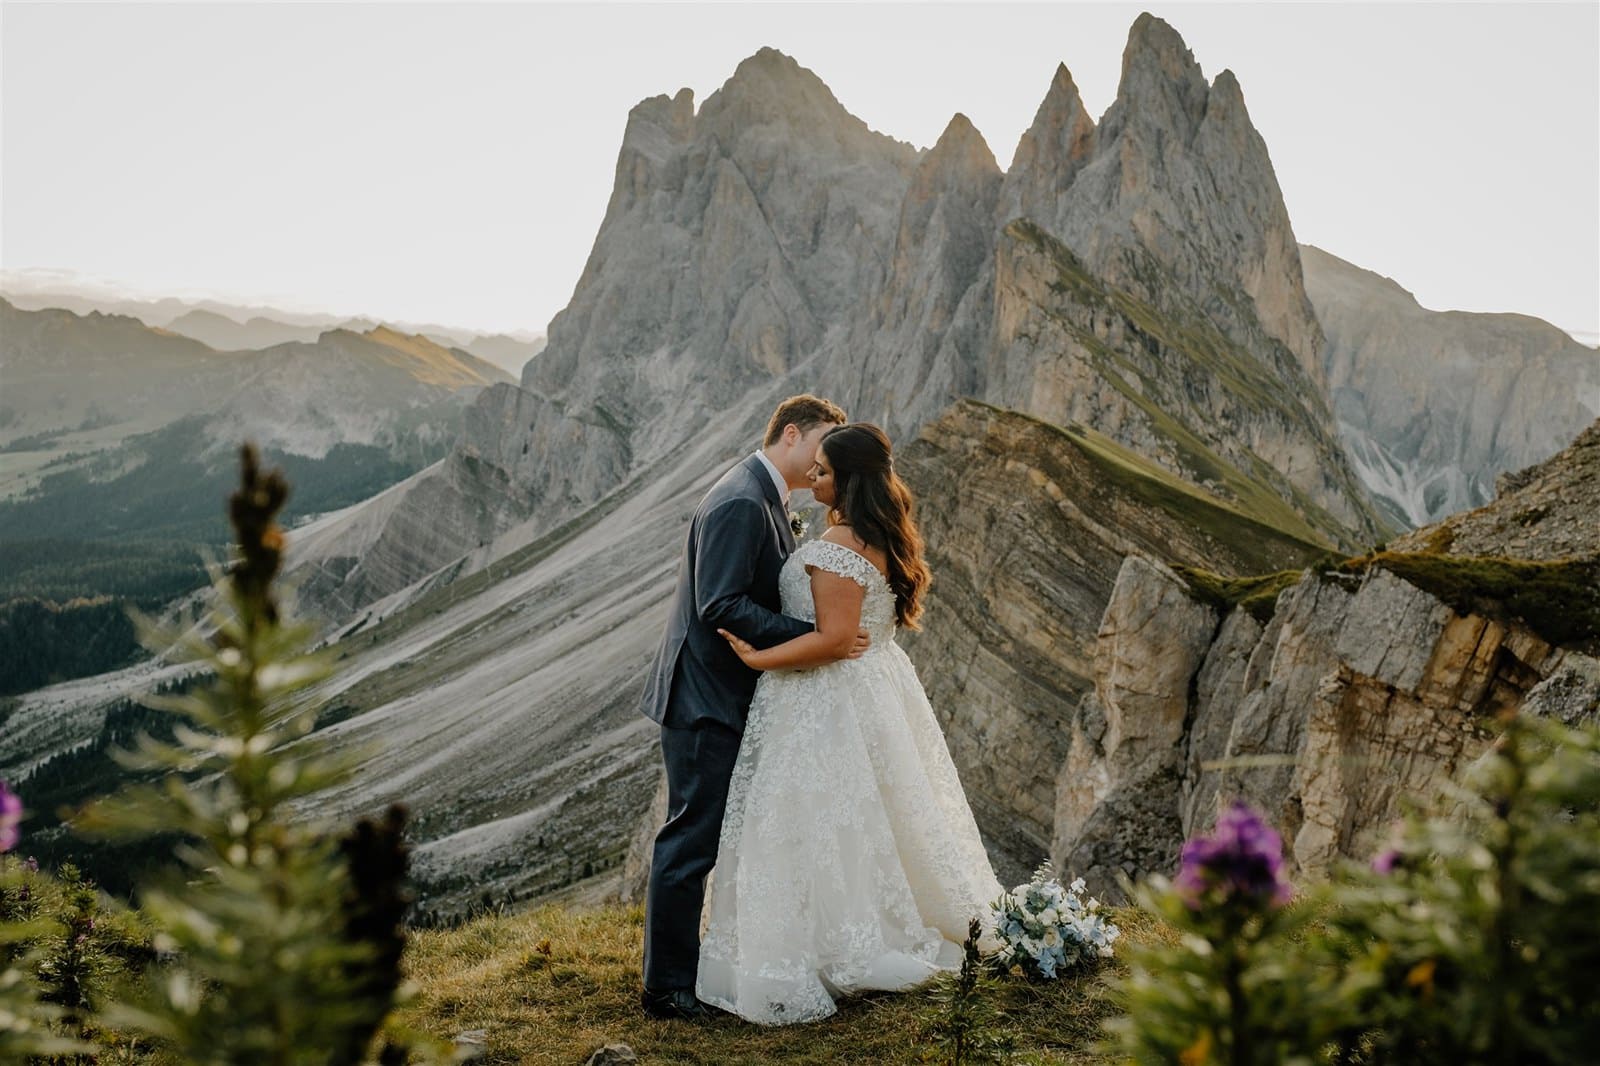 Bride and groom standing in a field of purple wildflowers kiss. Behind them is the famous Seceda mountain in the Dolomites.